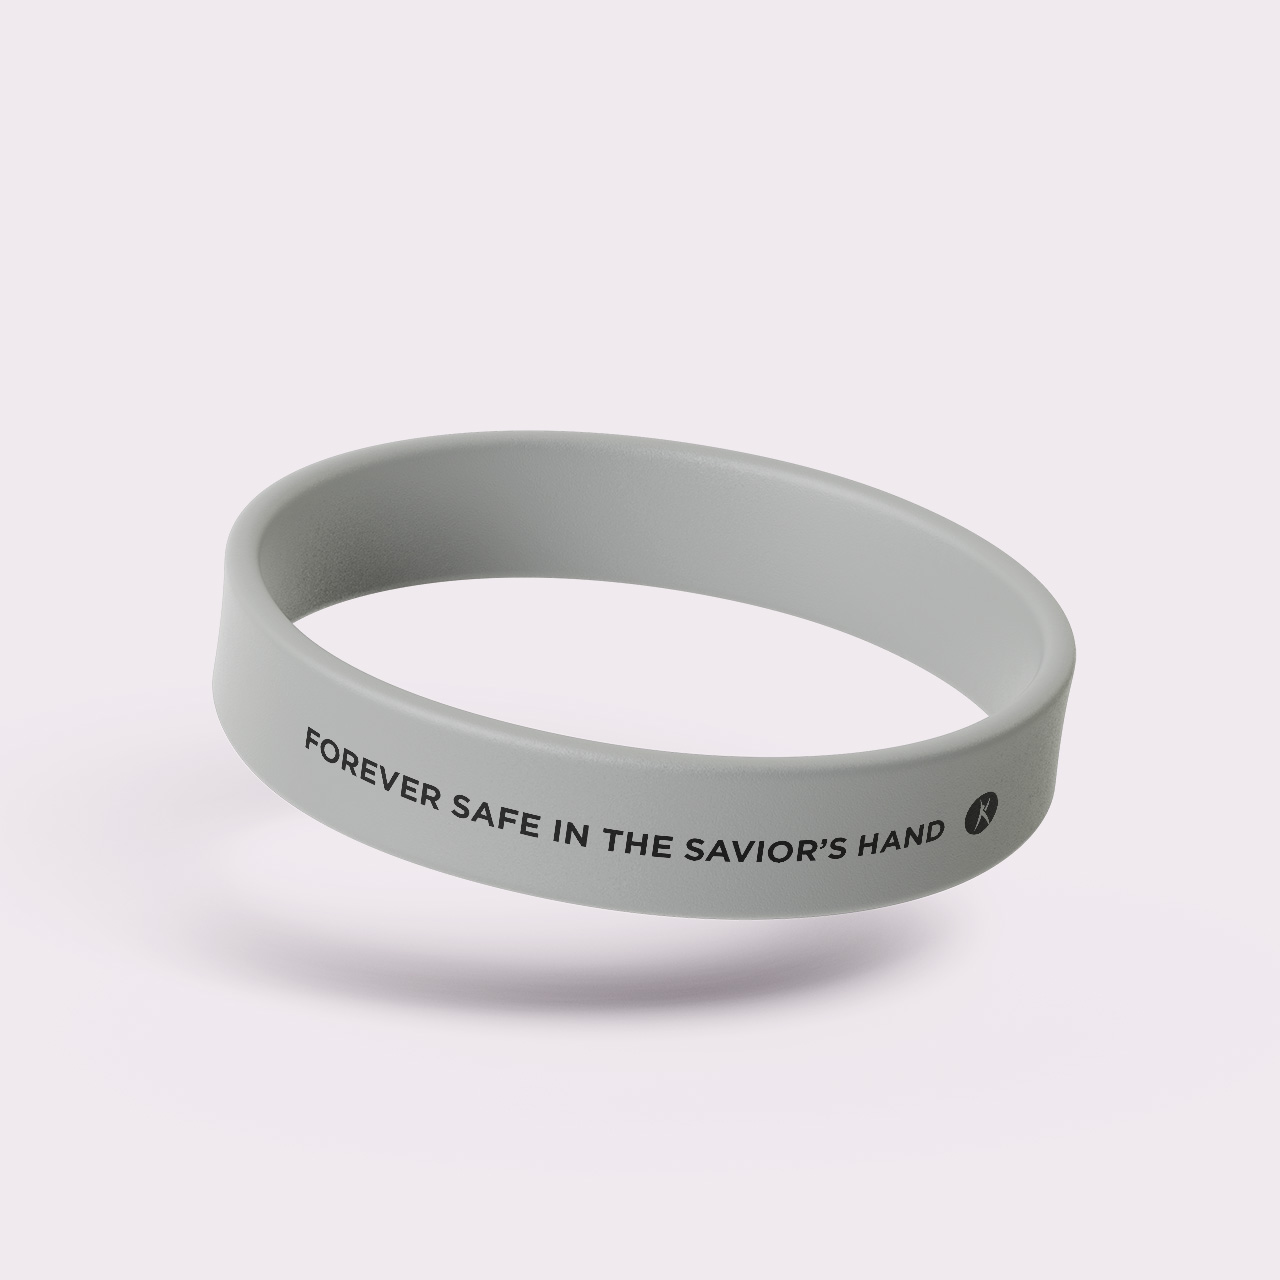 OW41002 - Siliconen armband - Forever safe in the Savior's hand